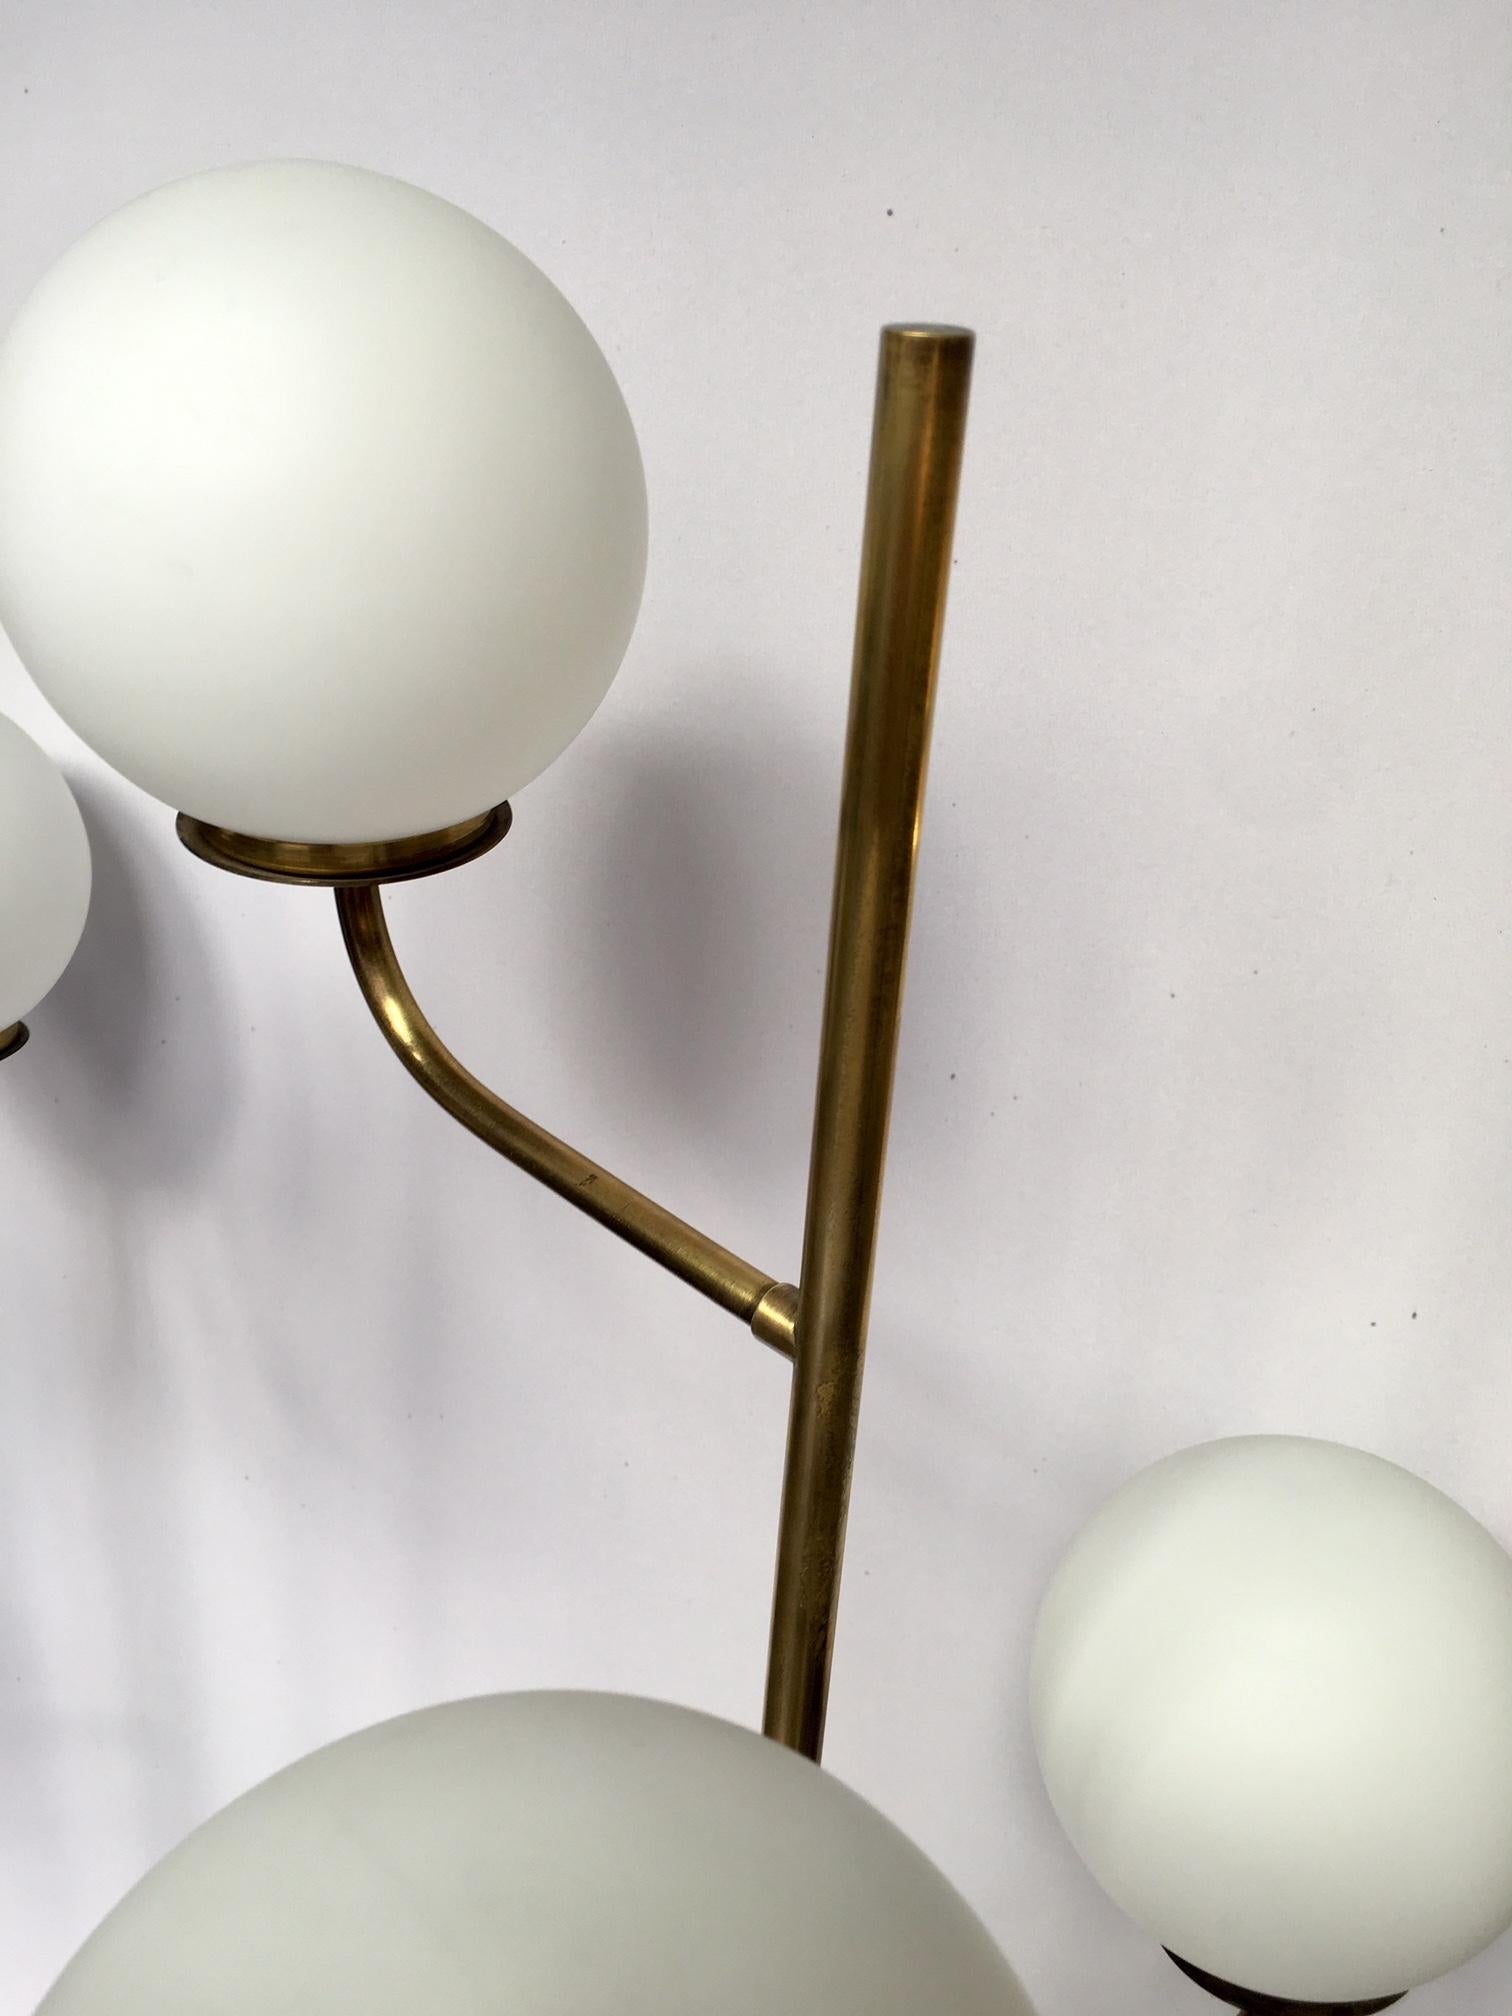  Pair of Mid-Centyry Triple Lighting Floor Lamps by Maison Lunel 1